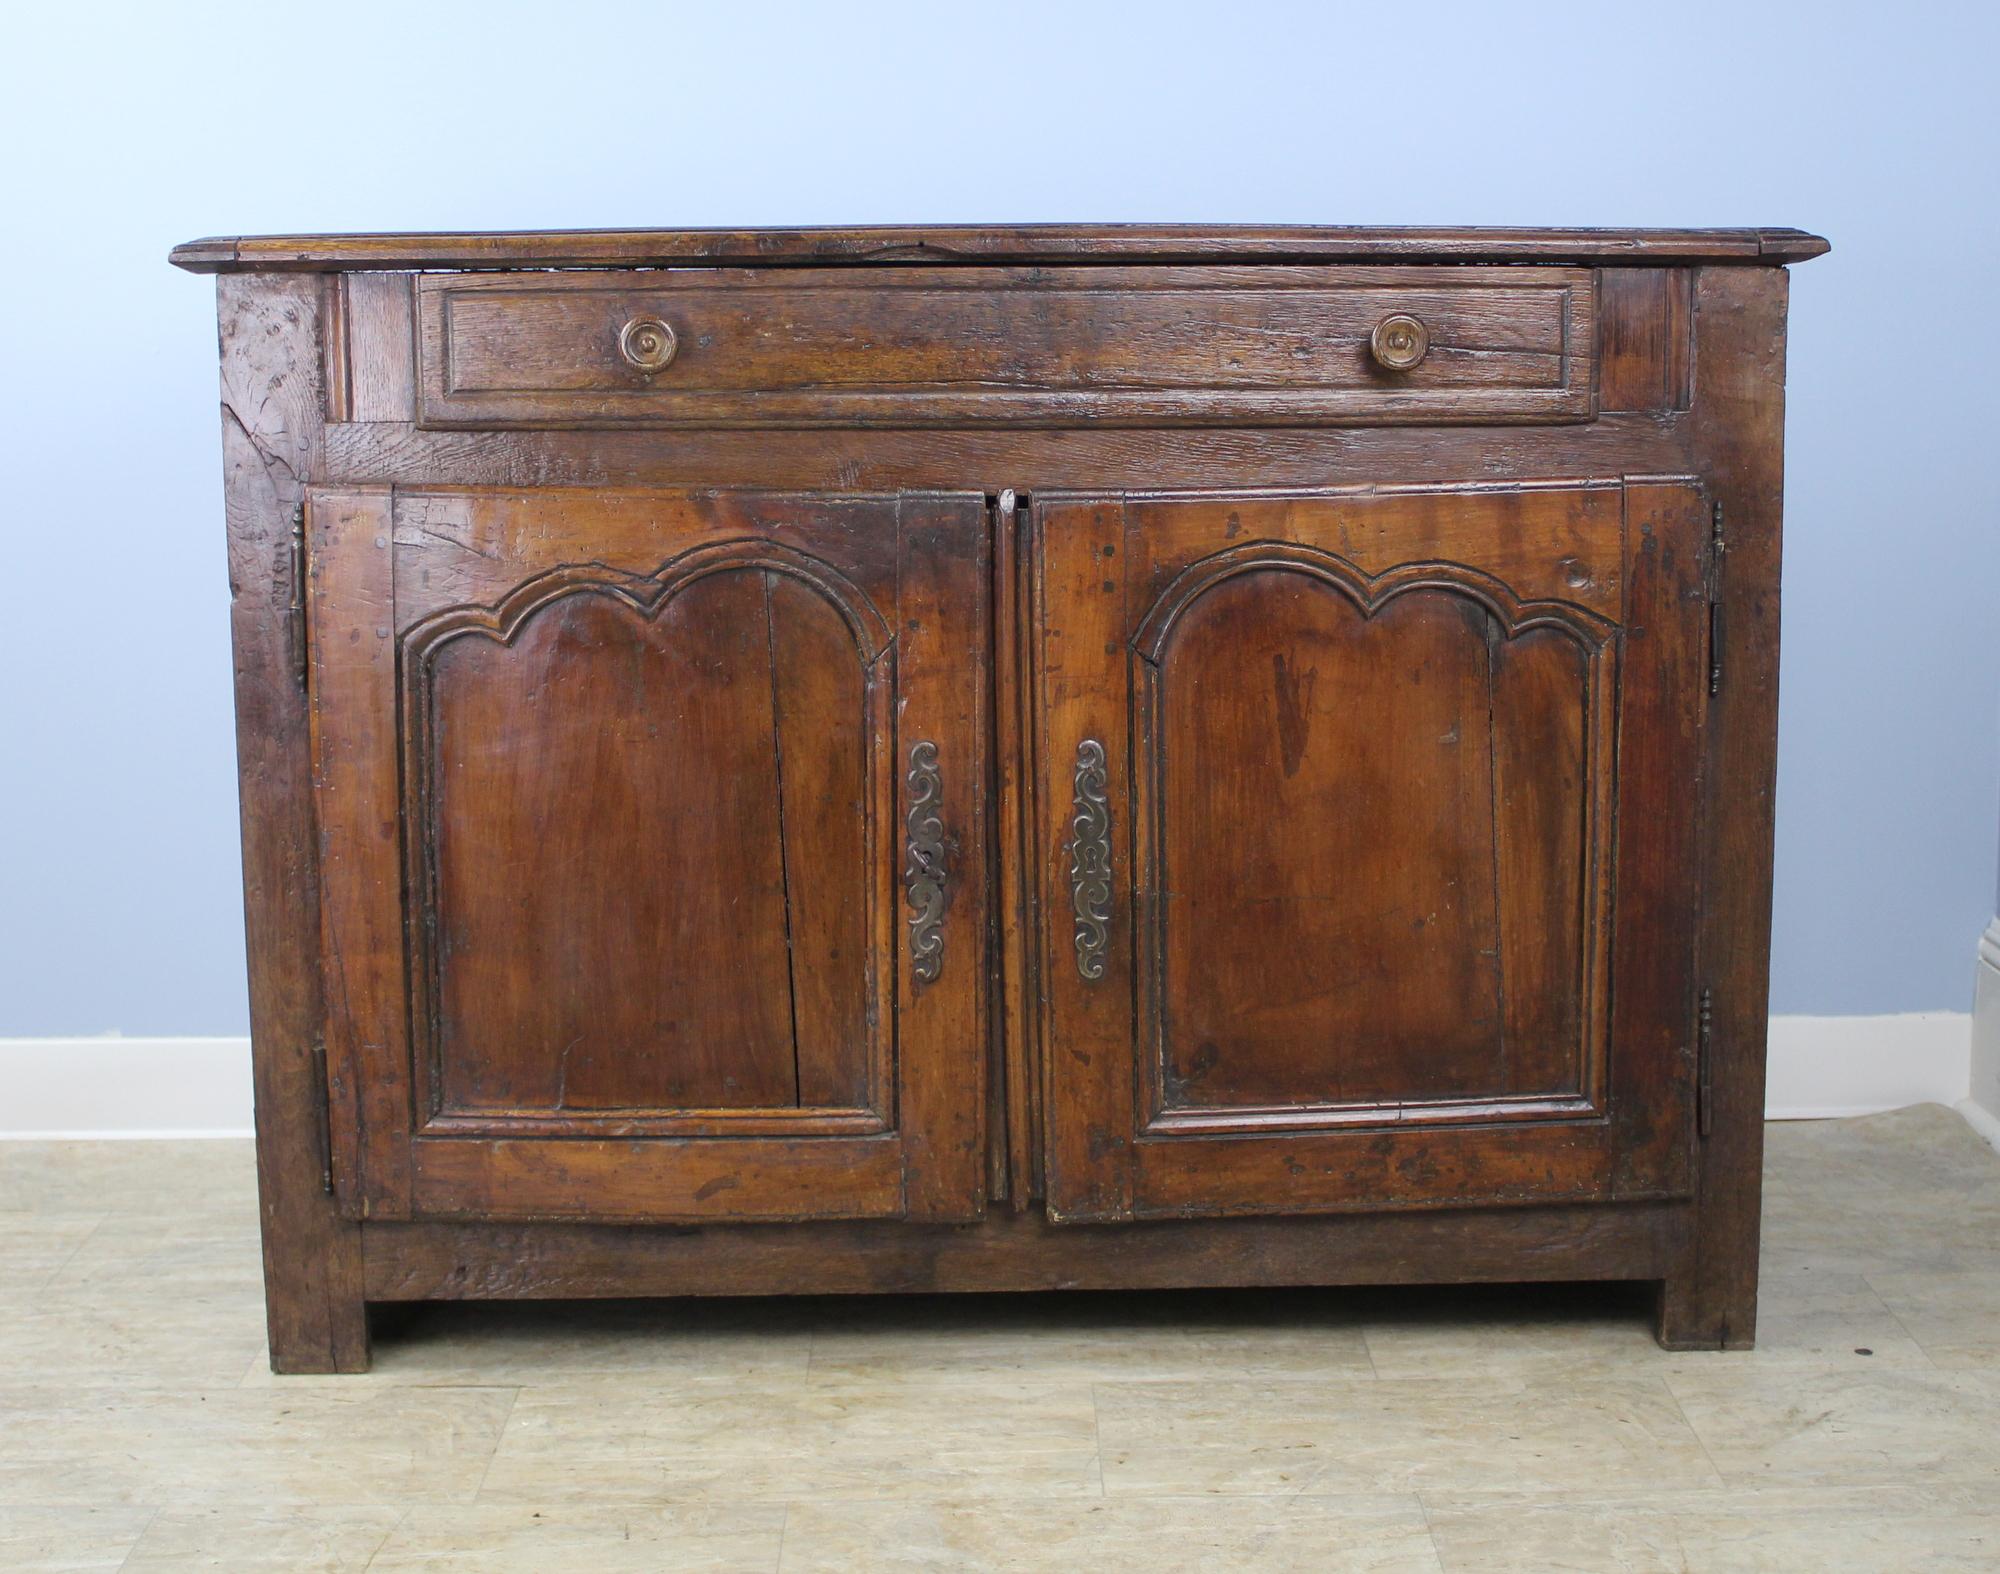 A handsome rustic country chestnut buffet with a single roomy drawer at the top. The two-doors close well and have charming carved inset panels. The interior shelf is no adjustable. Color and patina on this piece are excellent. Moderate distress